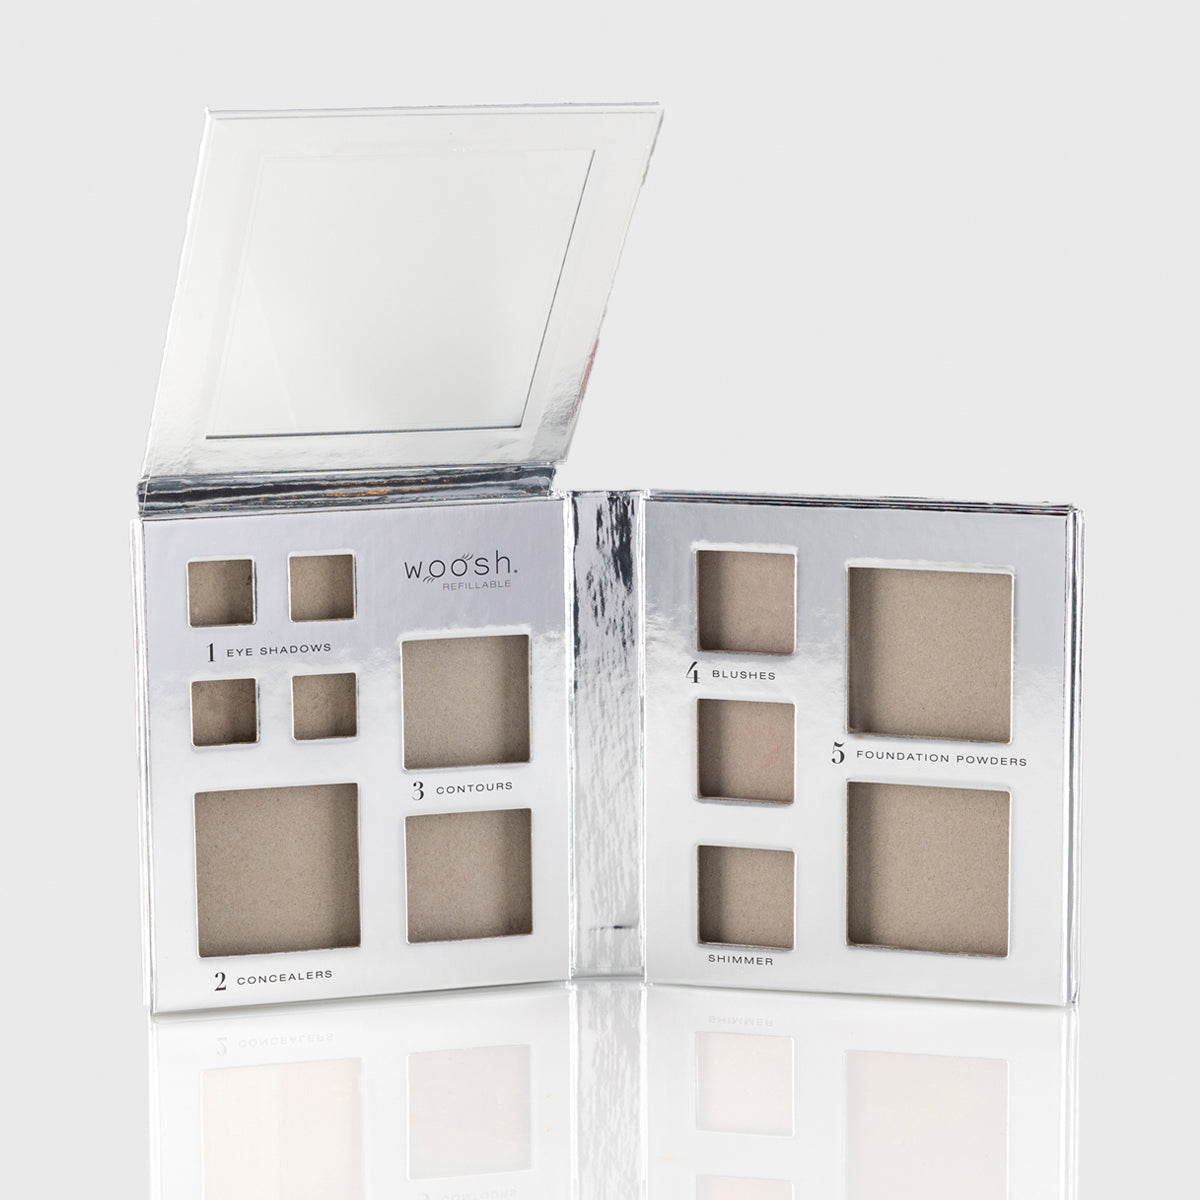 a photo of an empty silver makeup palette with mirrored flap and slots for 13 different cosmetic products